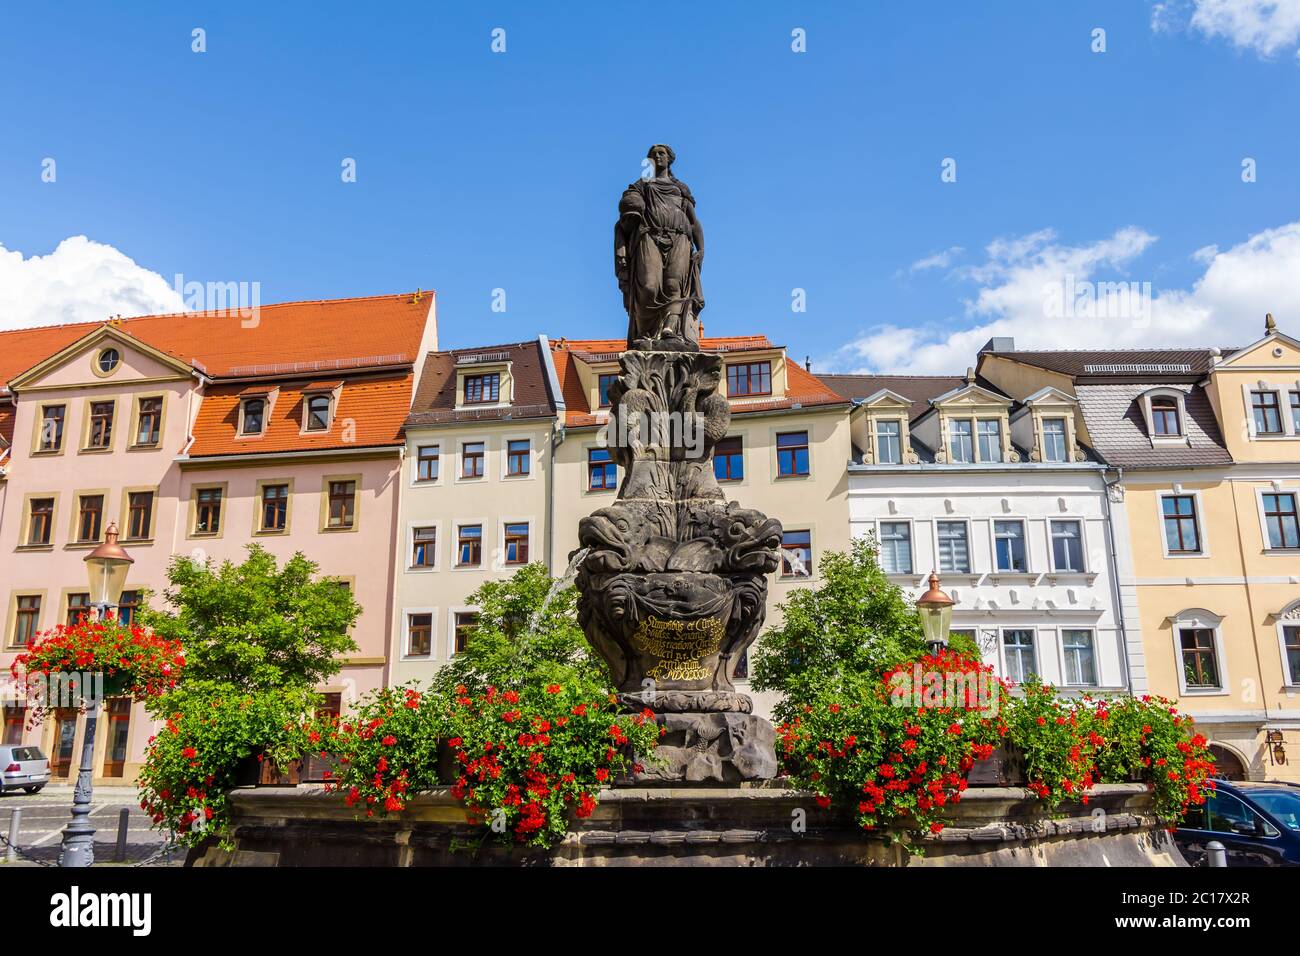 Statue and waterspout fountain in the old town of Zittau, Germany Stock Photo